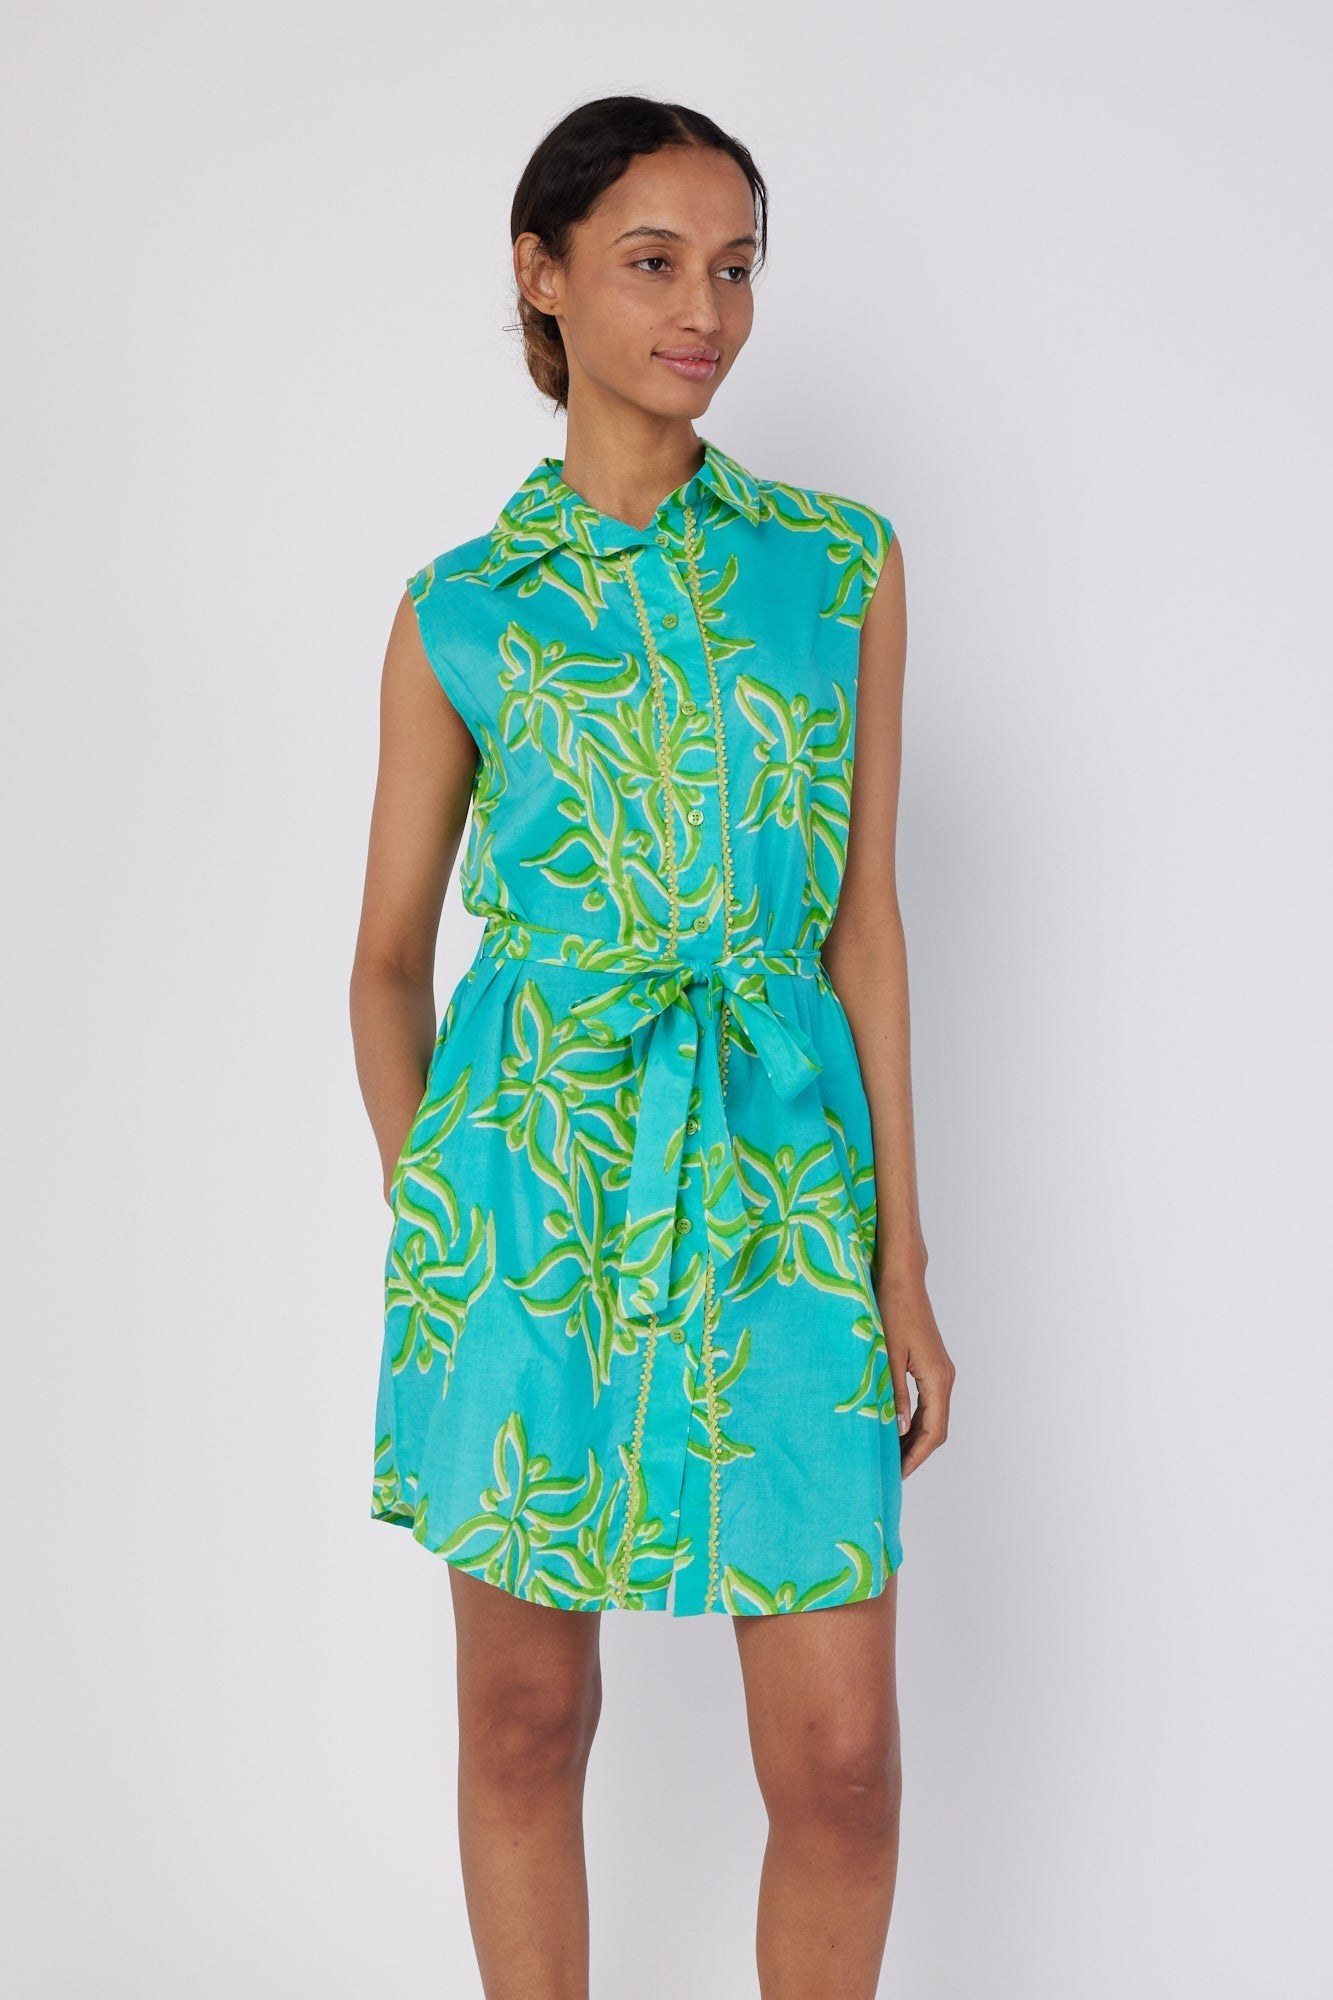 ModaPosa Carlotta Short Sleeve Shirt Dress with Pockets and Detachable Belt in Green Abstract Flower . Discover women's resort dresses and lifestyle clothing inspired by the Mediterranean. Free worldwide shipping available!